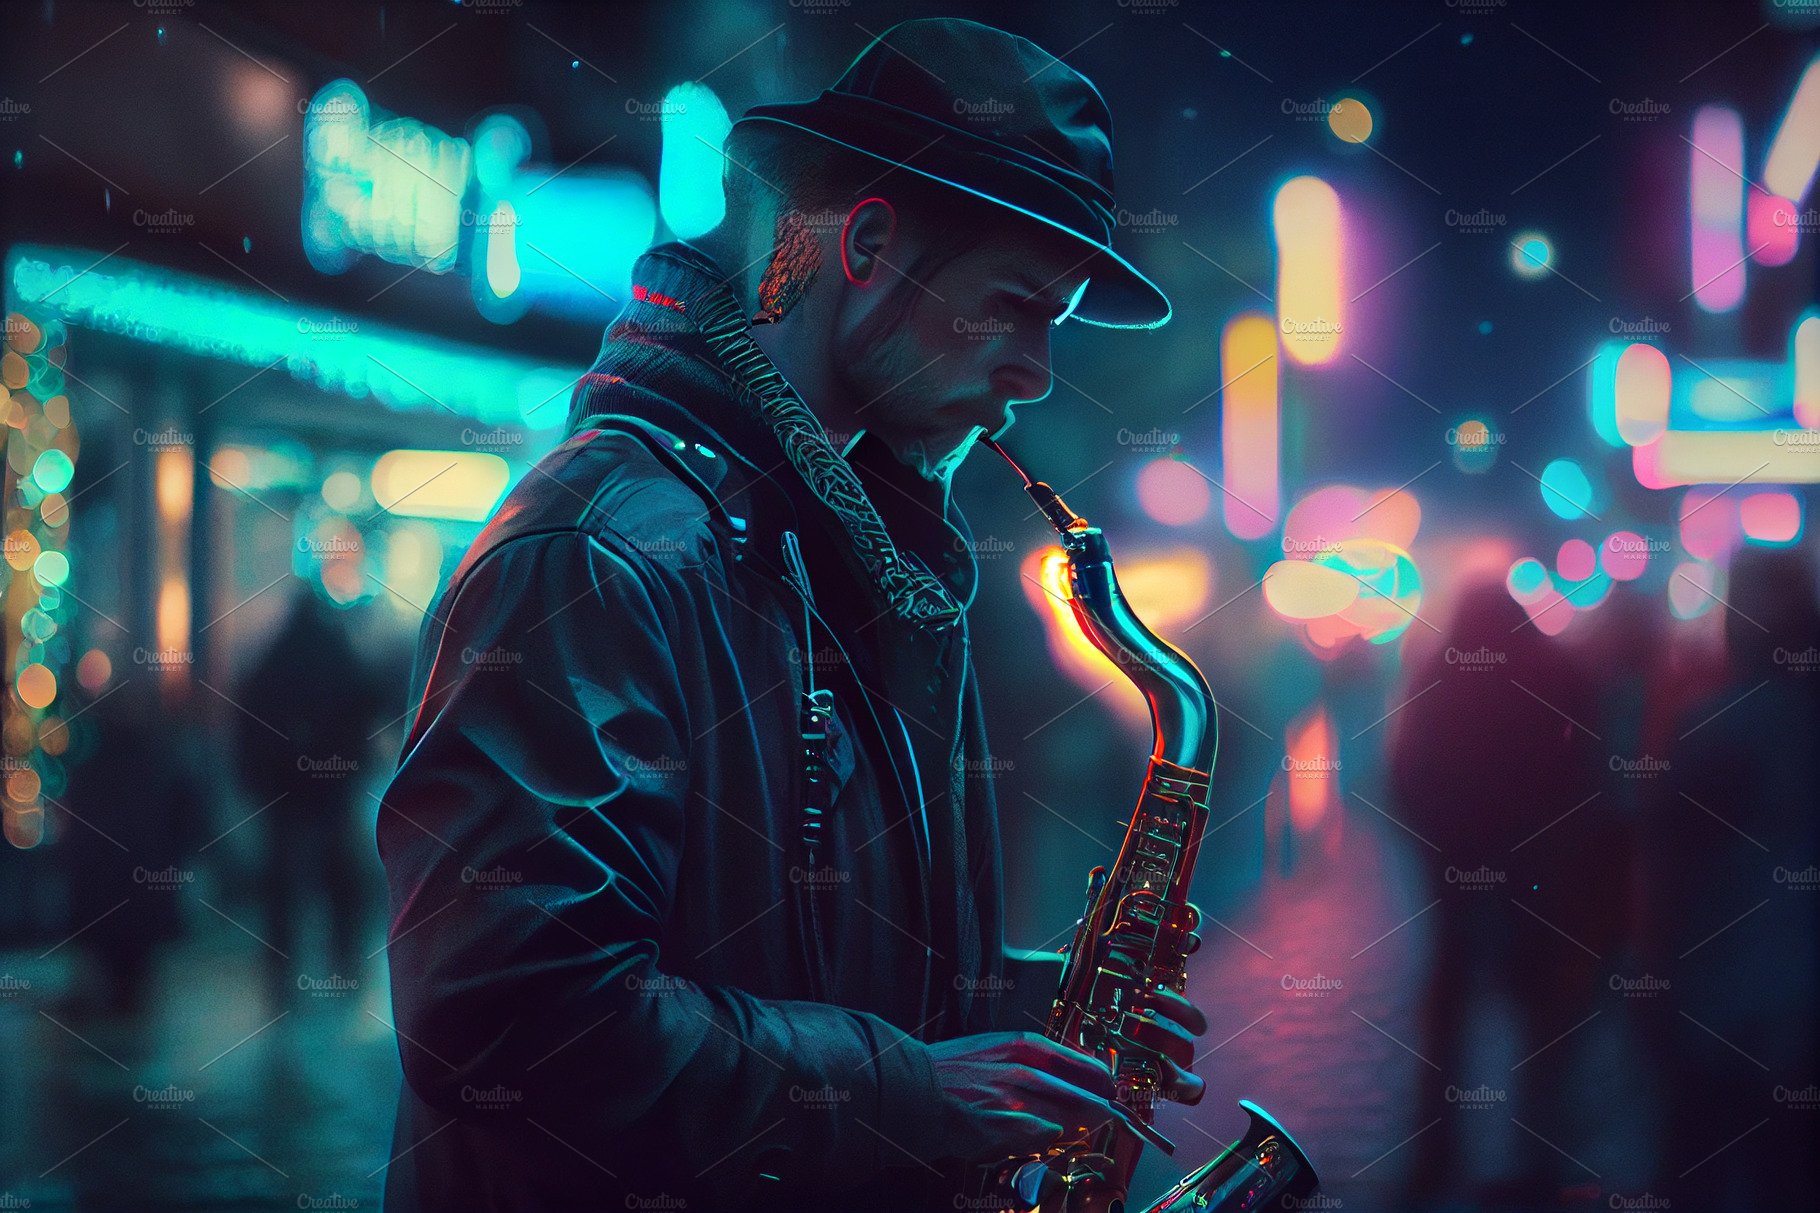 Joyful Street musician playing saxophone in the evening street with neon li... cover image.